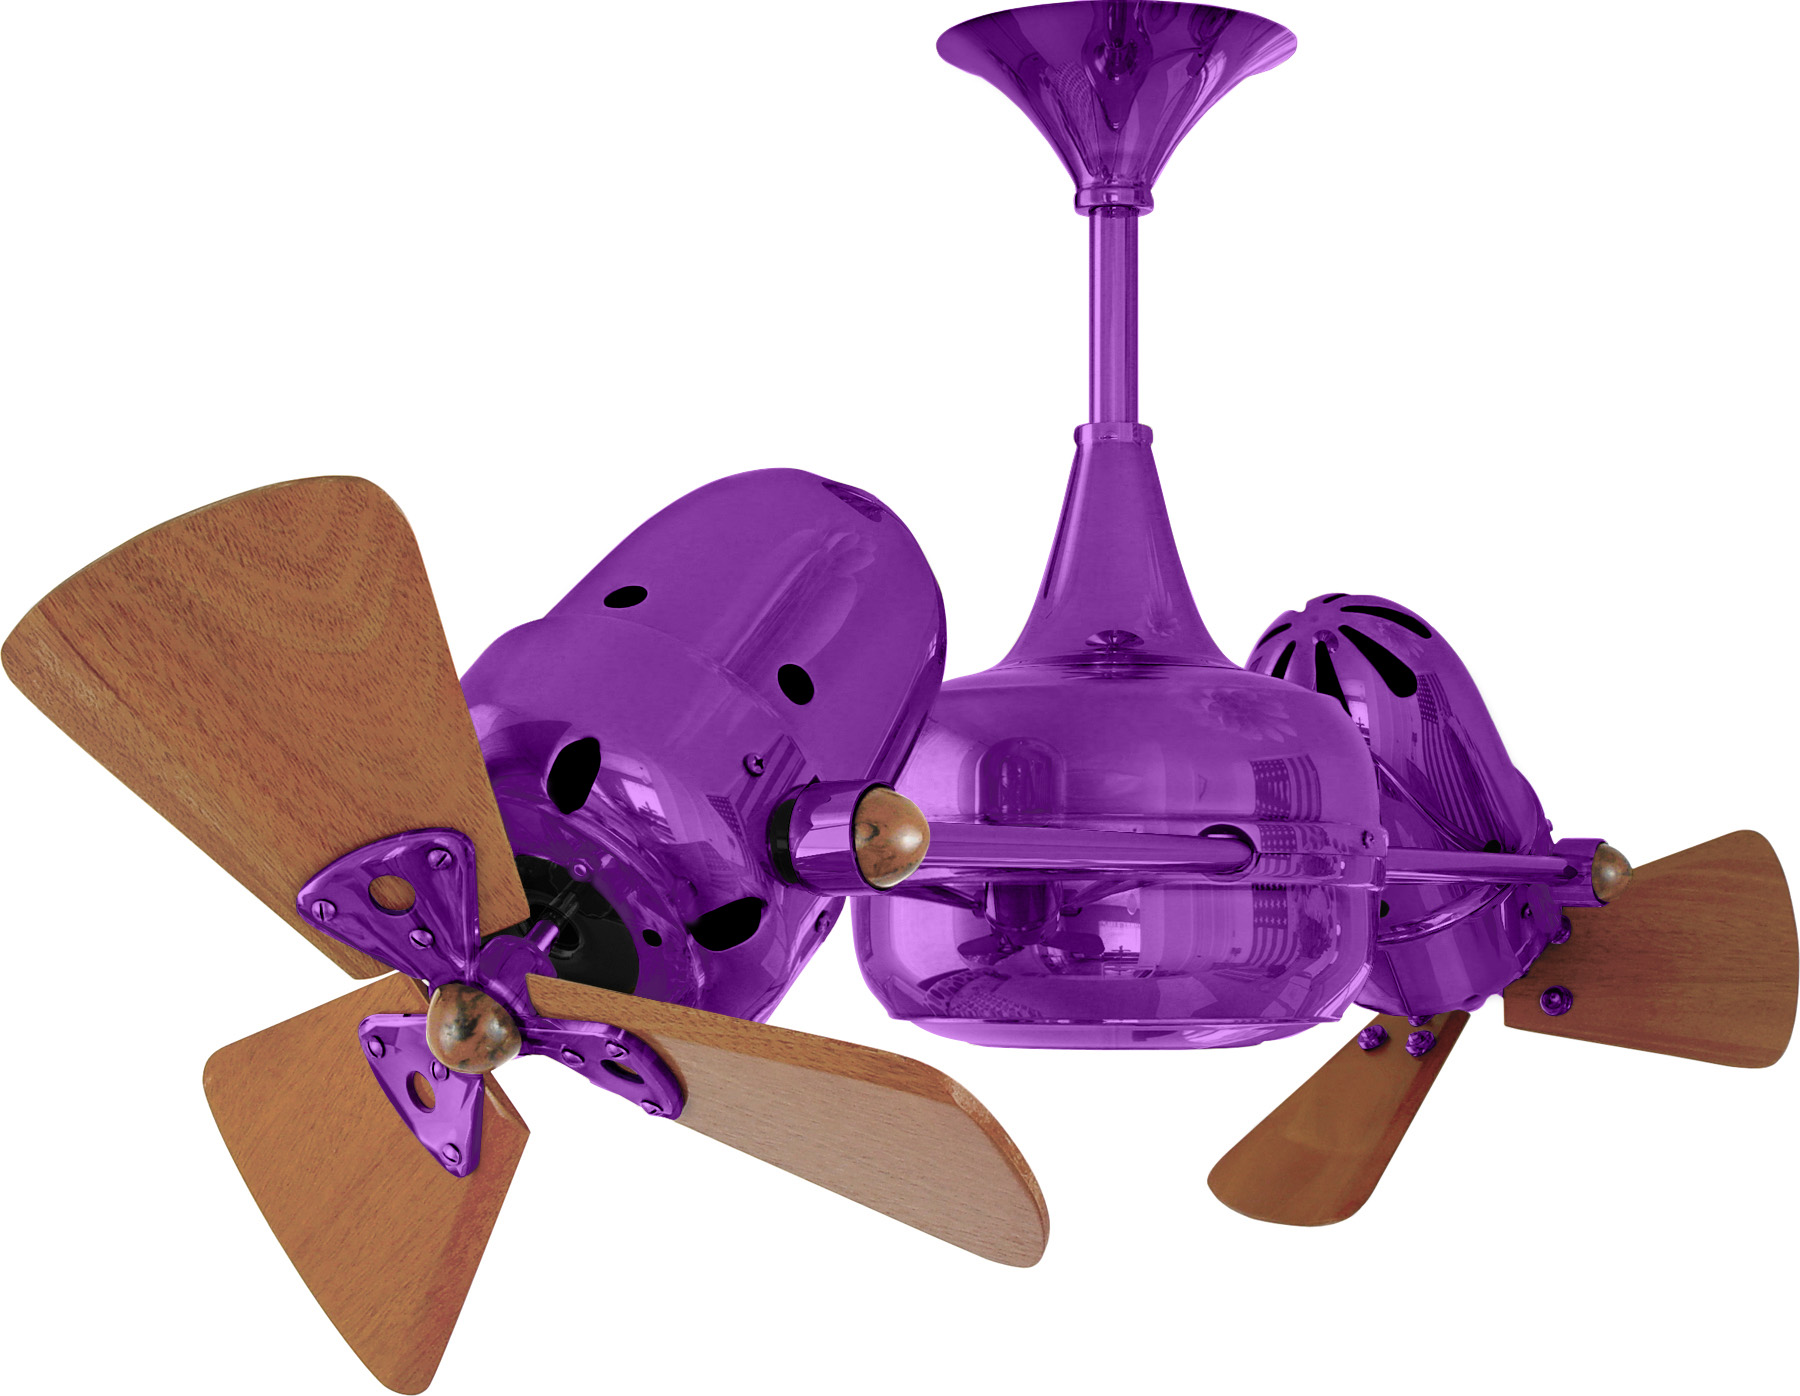 Duplo Dinamico rotational dual head ceiling fan in light purple / ametista finish with solid mahogany wood blades made by Matthews Fan Company.